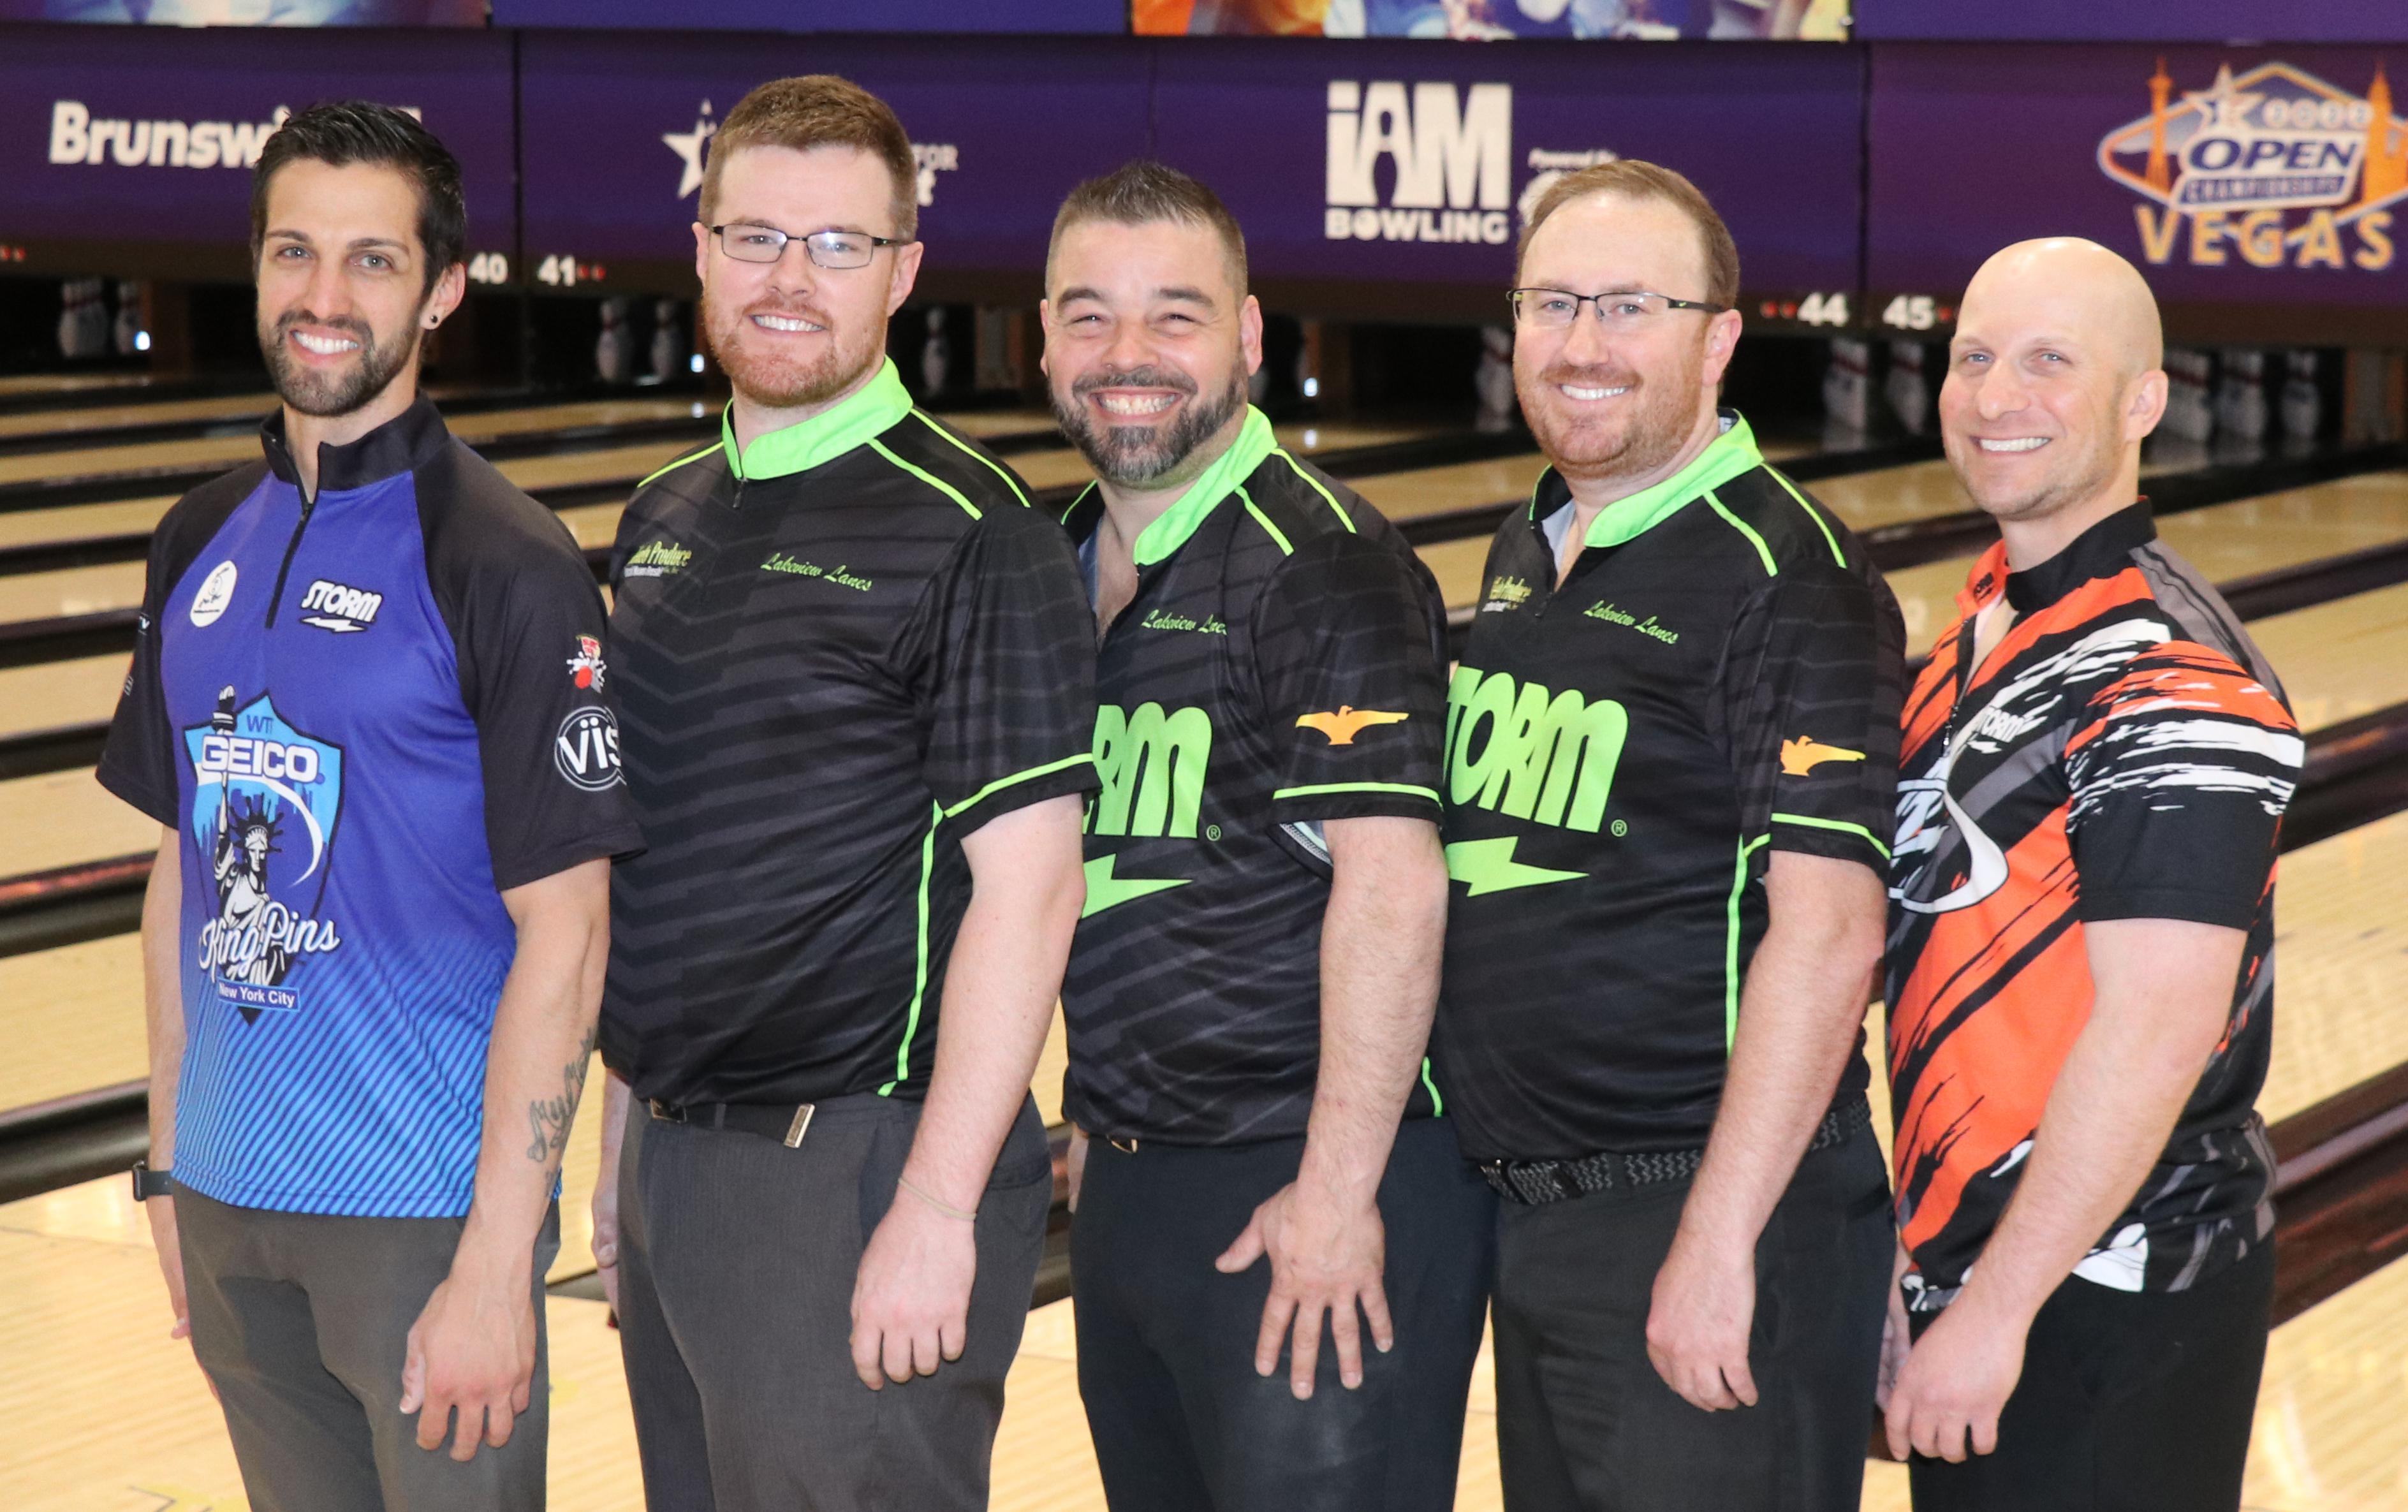 Baldwinsville bowling team breaks long-standing record at USBC Open Championships